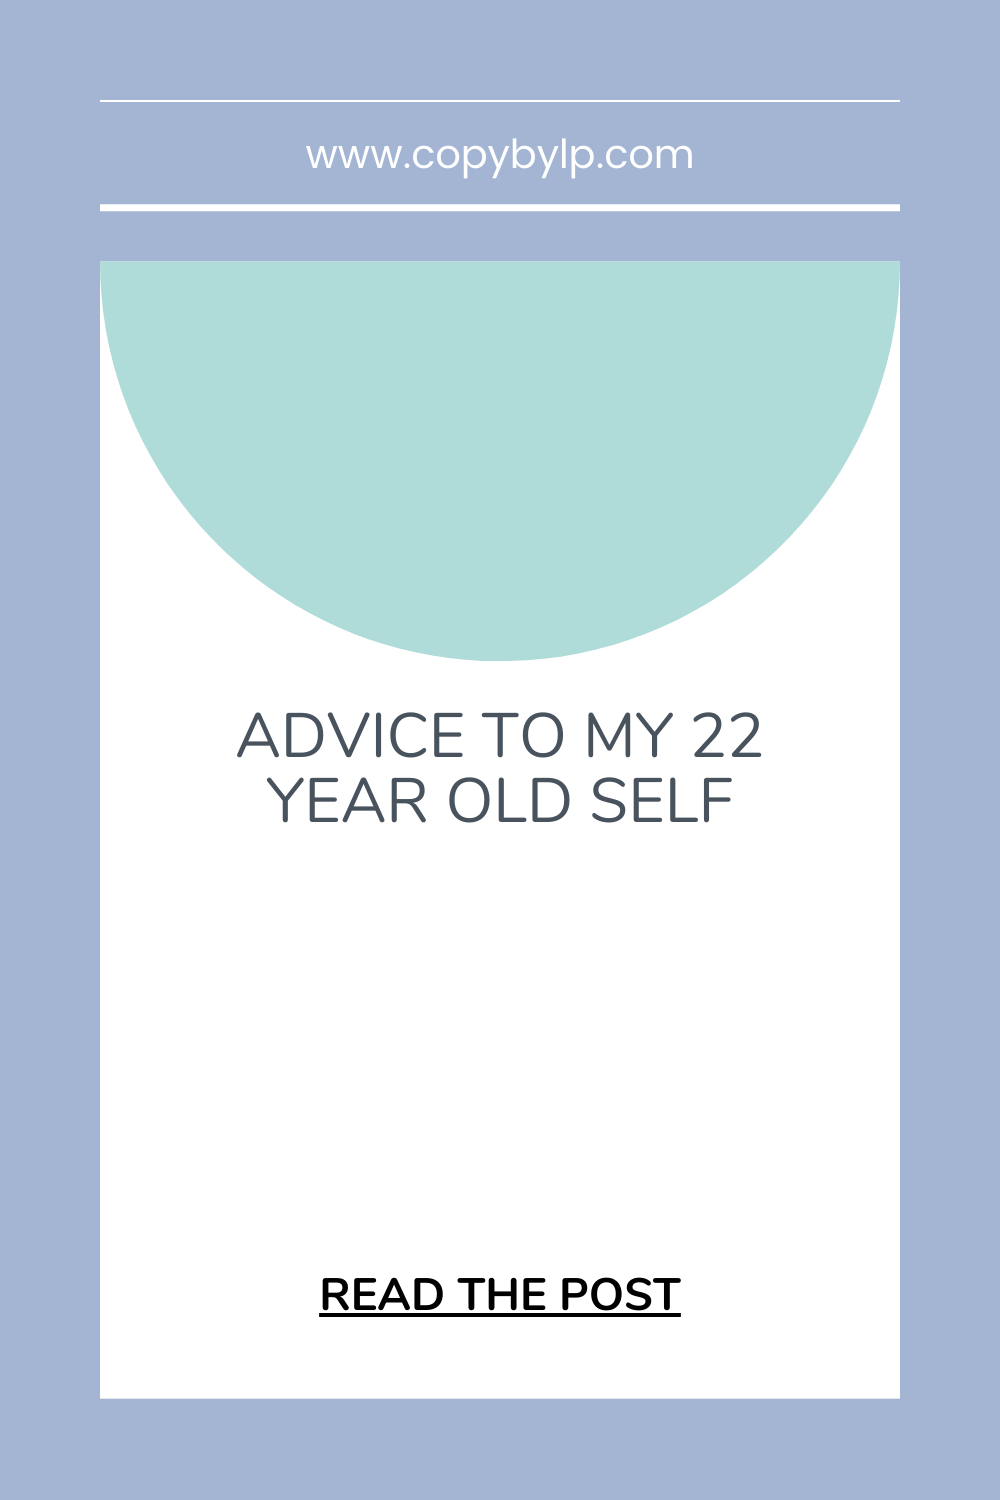 Advice to my 22 year old self title graphic